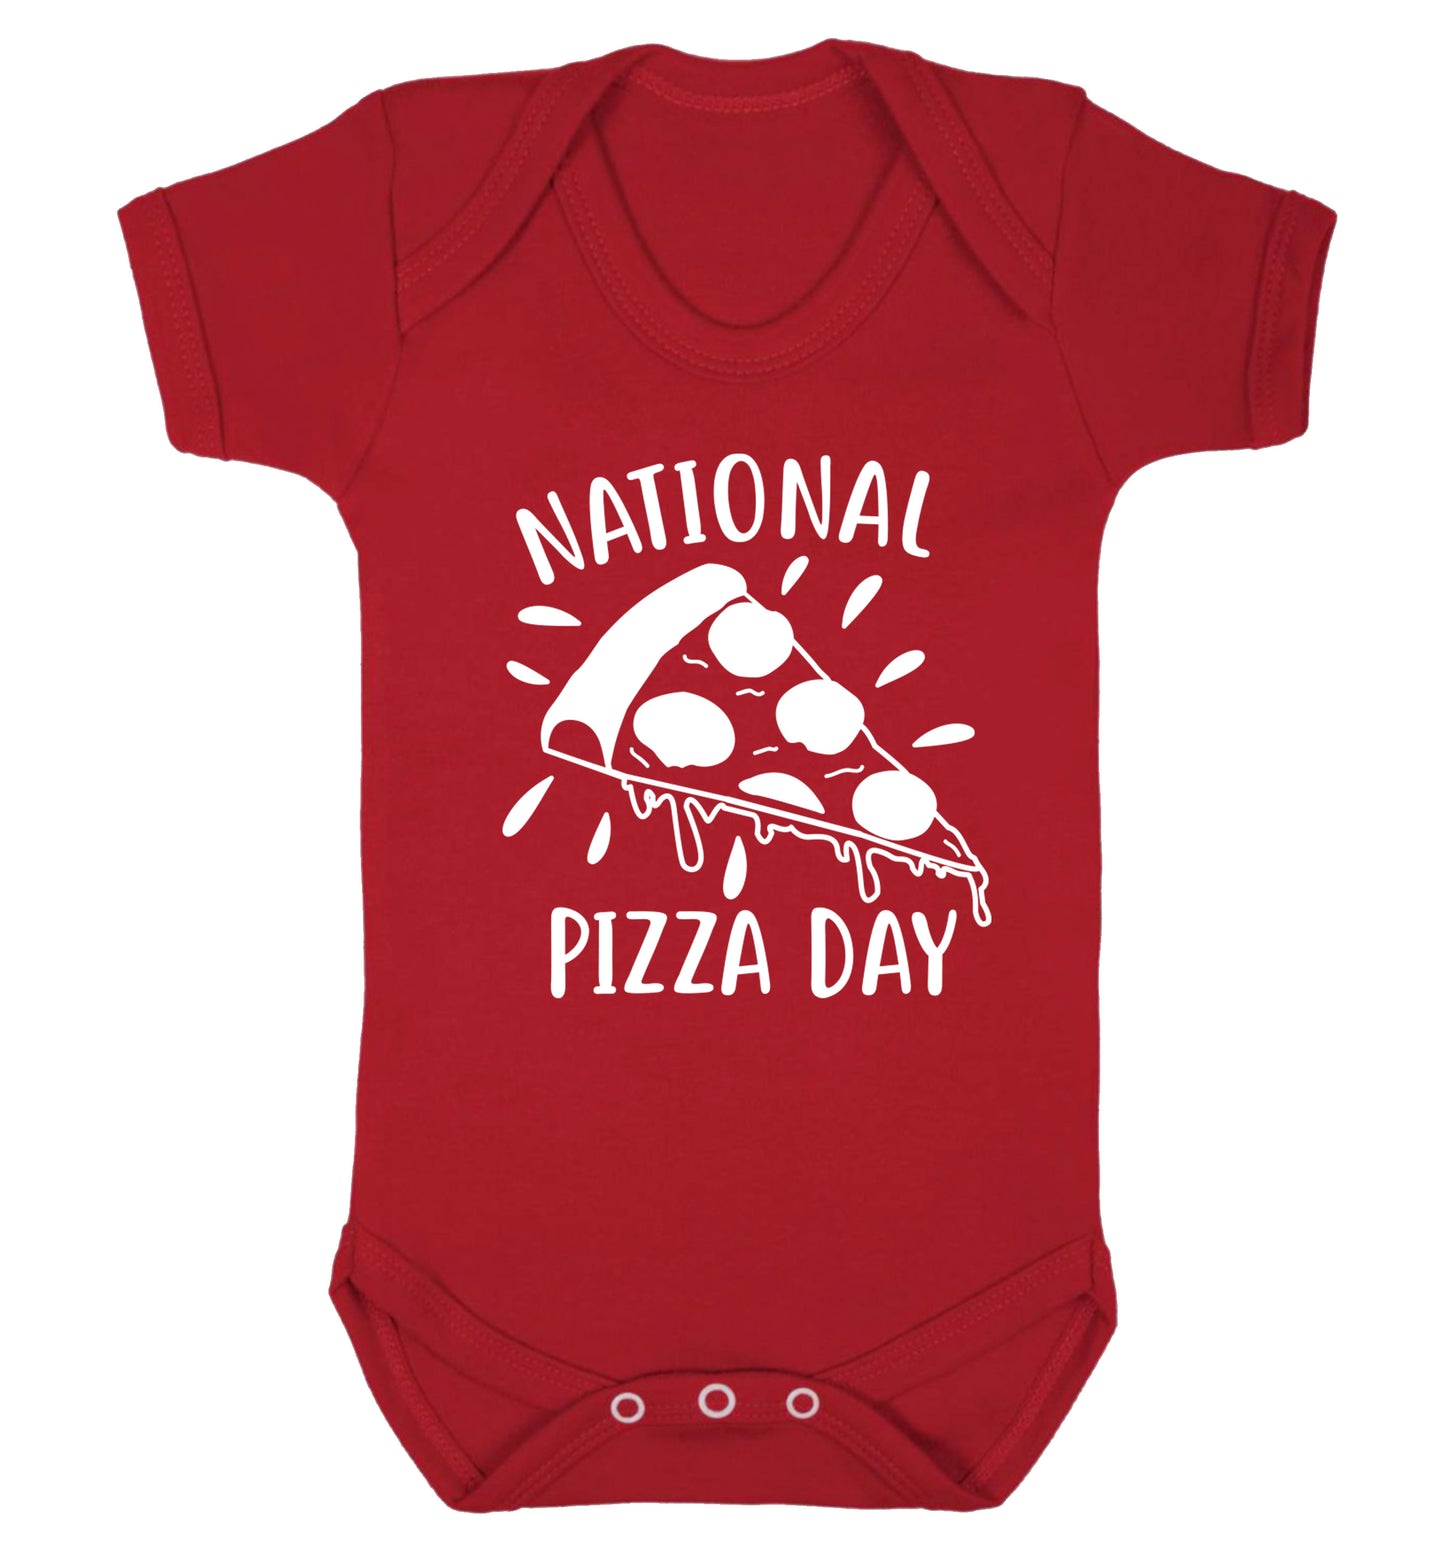 National pizza day Baby Vest red 18-24 months